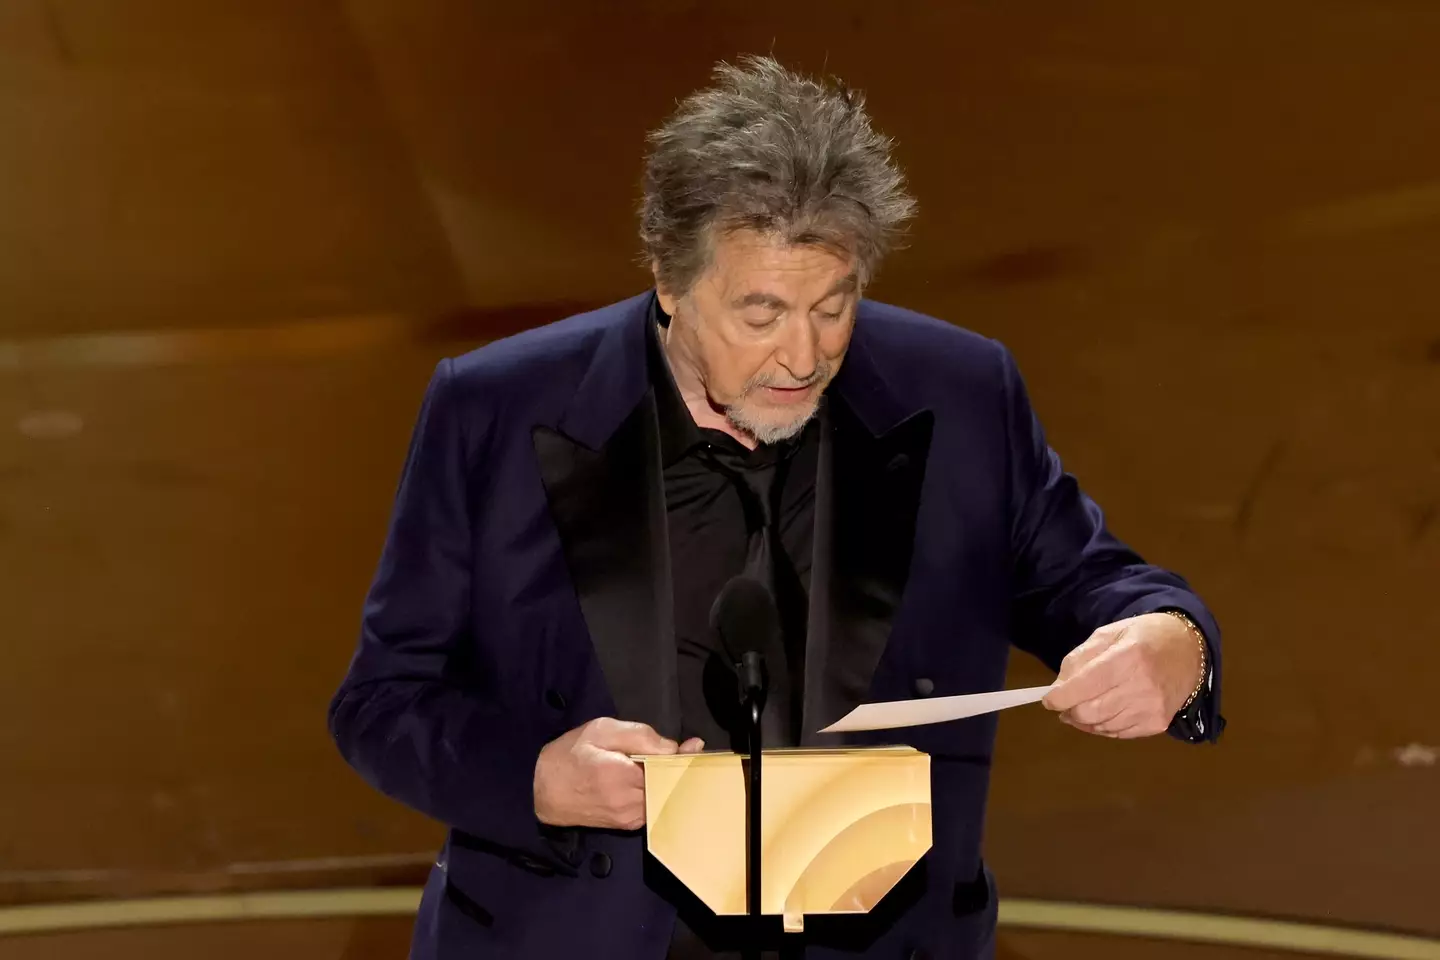 Al Pacino cut to the chase with the announcement.